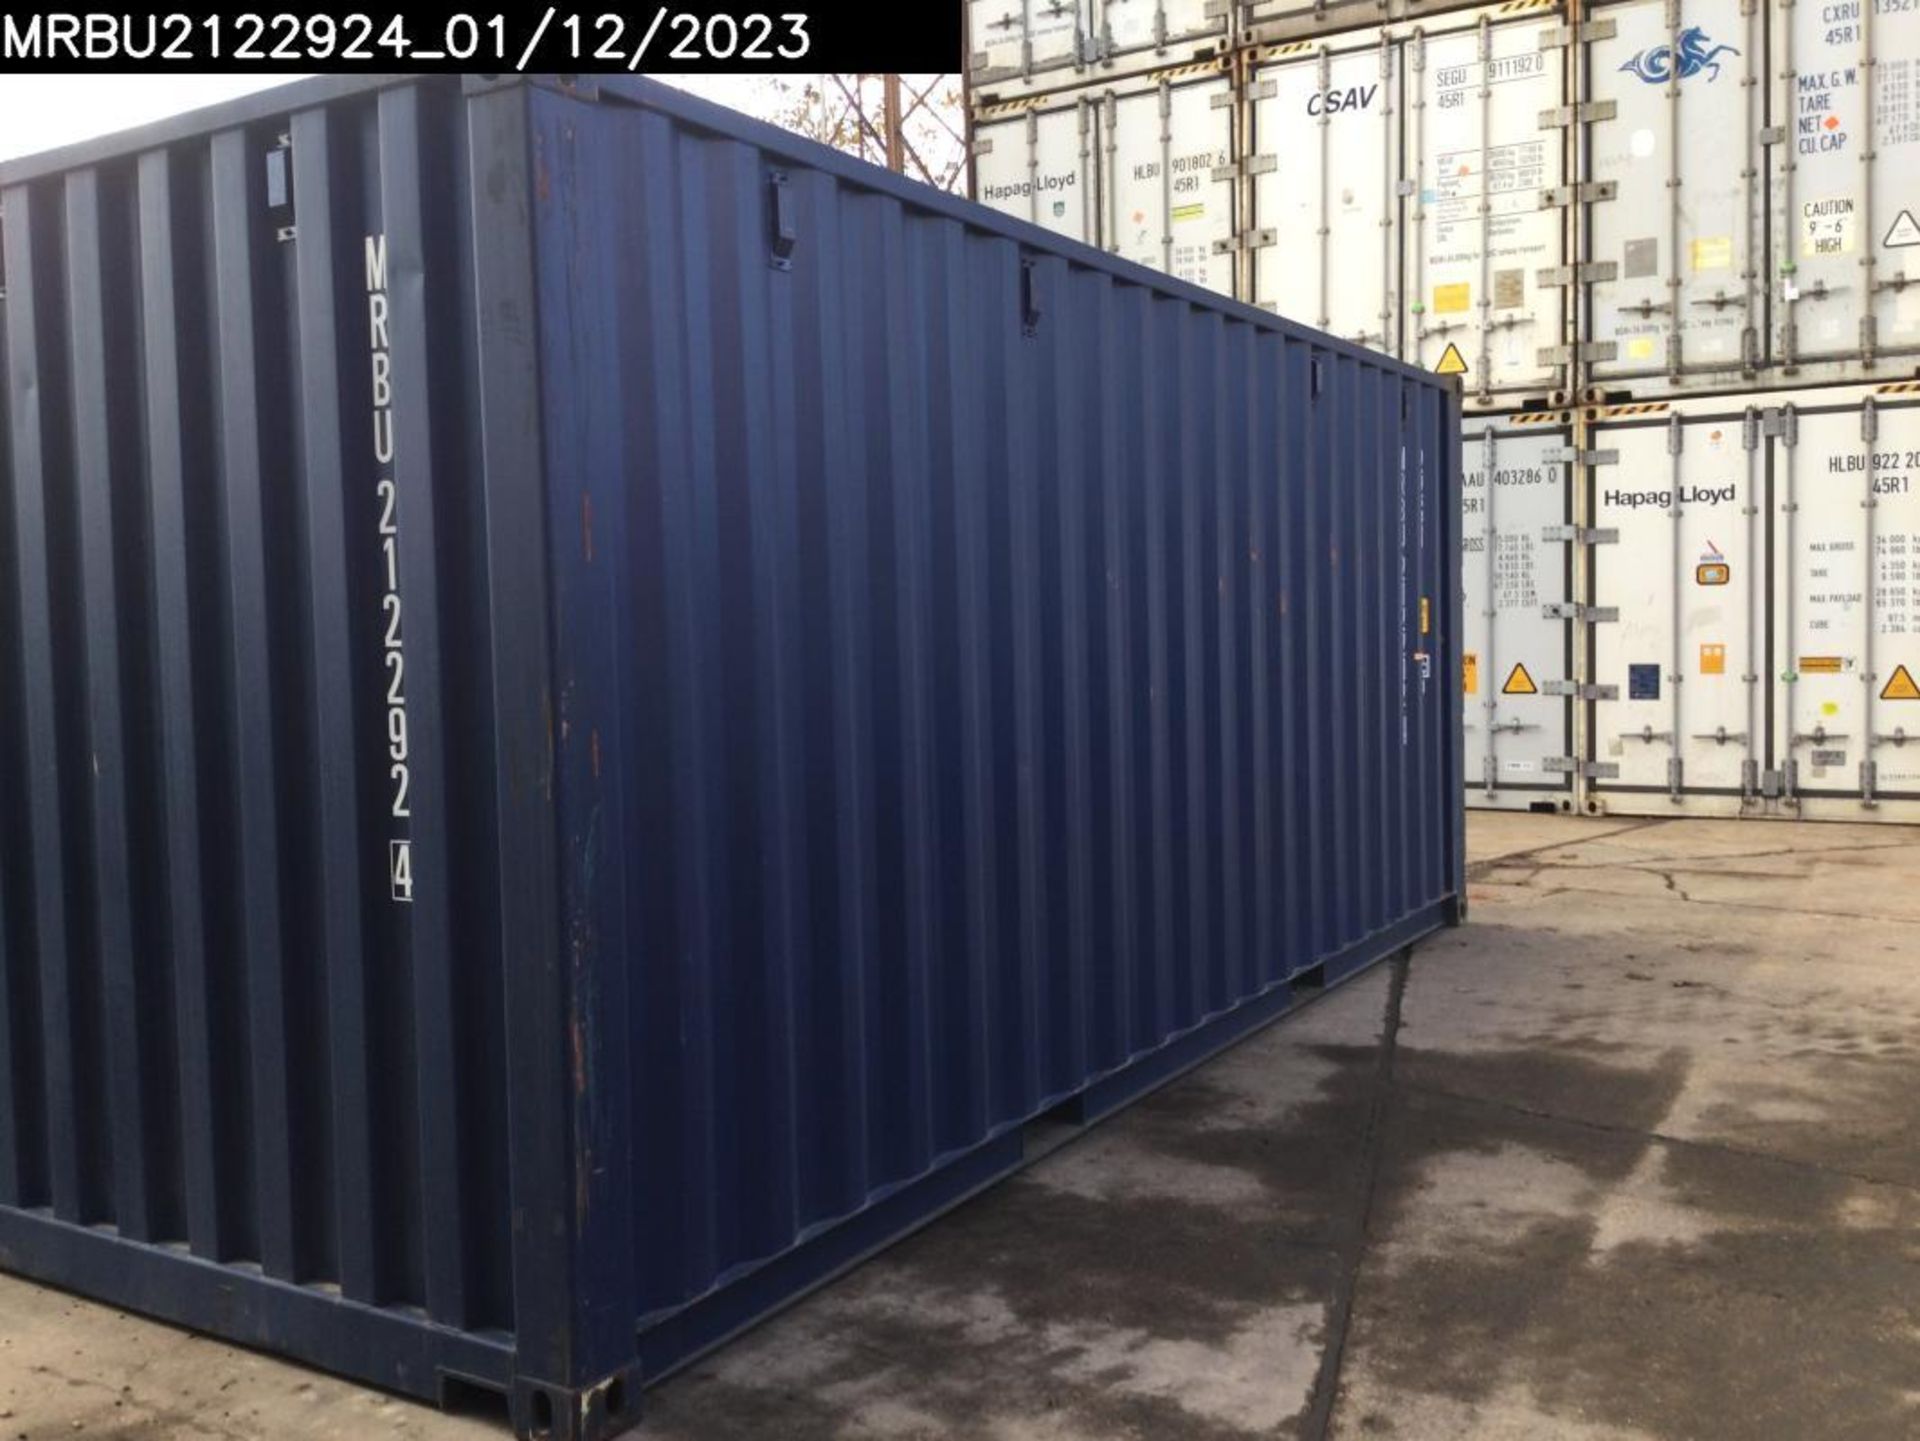 One Trip 20ft Shipping Container - Unit Number – MRBU2122924 - Bild 4 aus 5